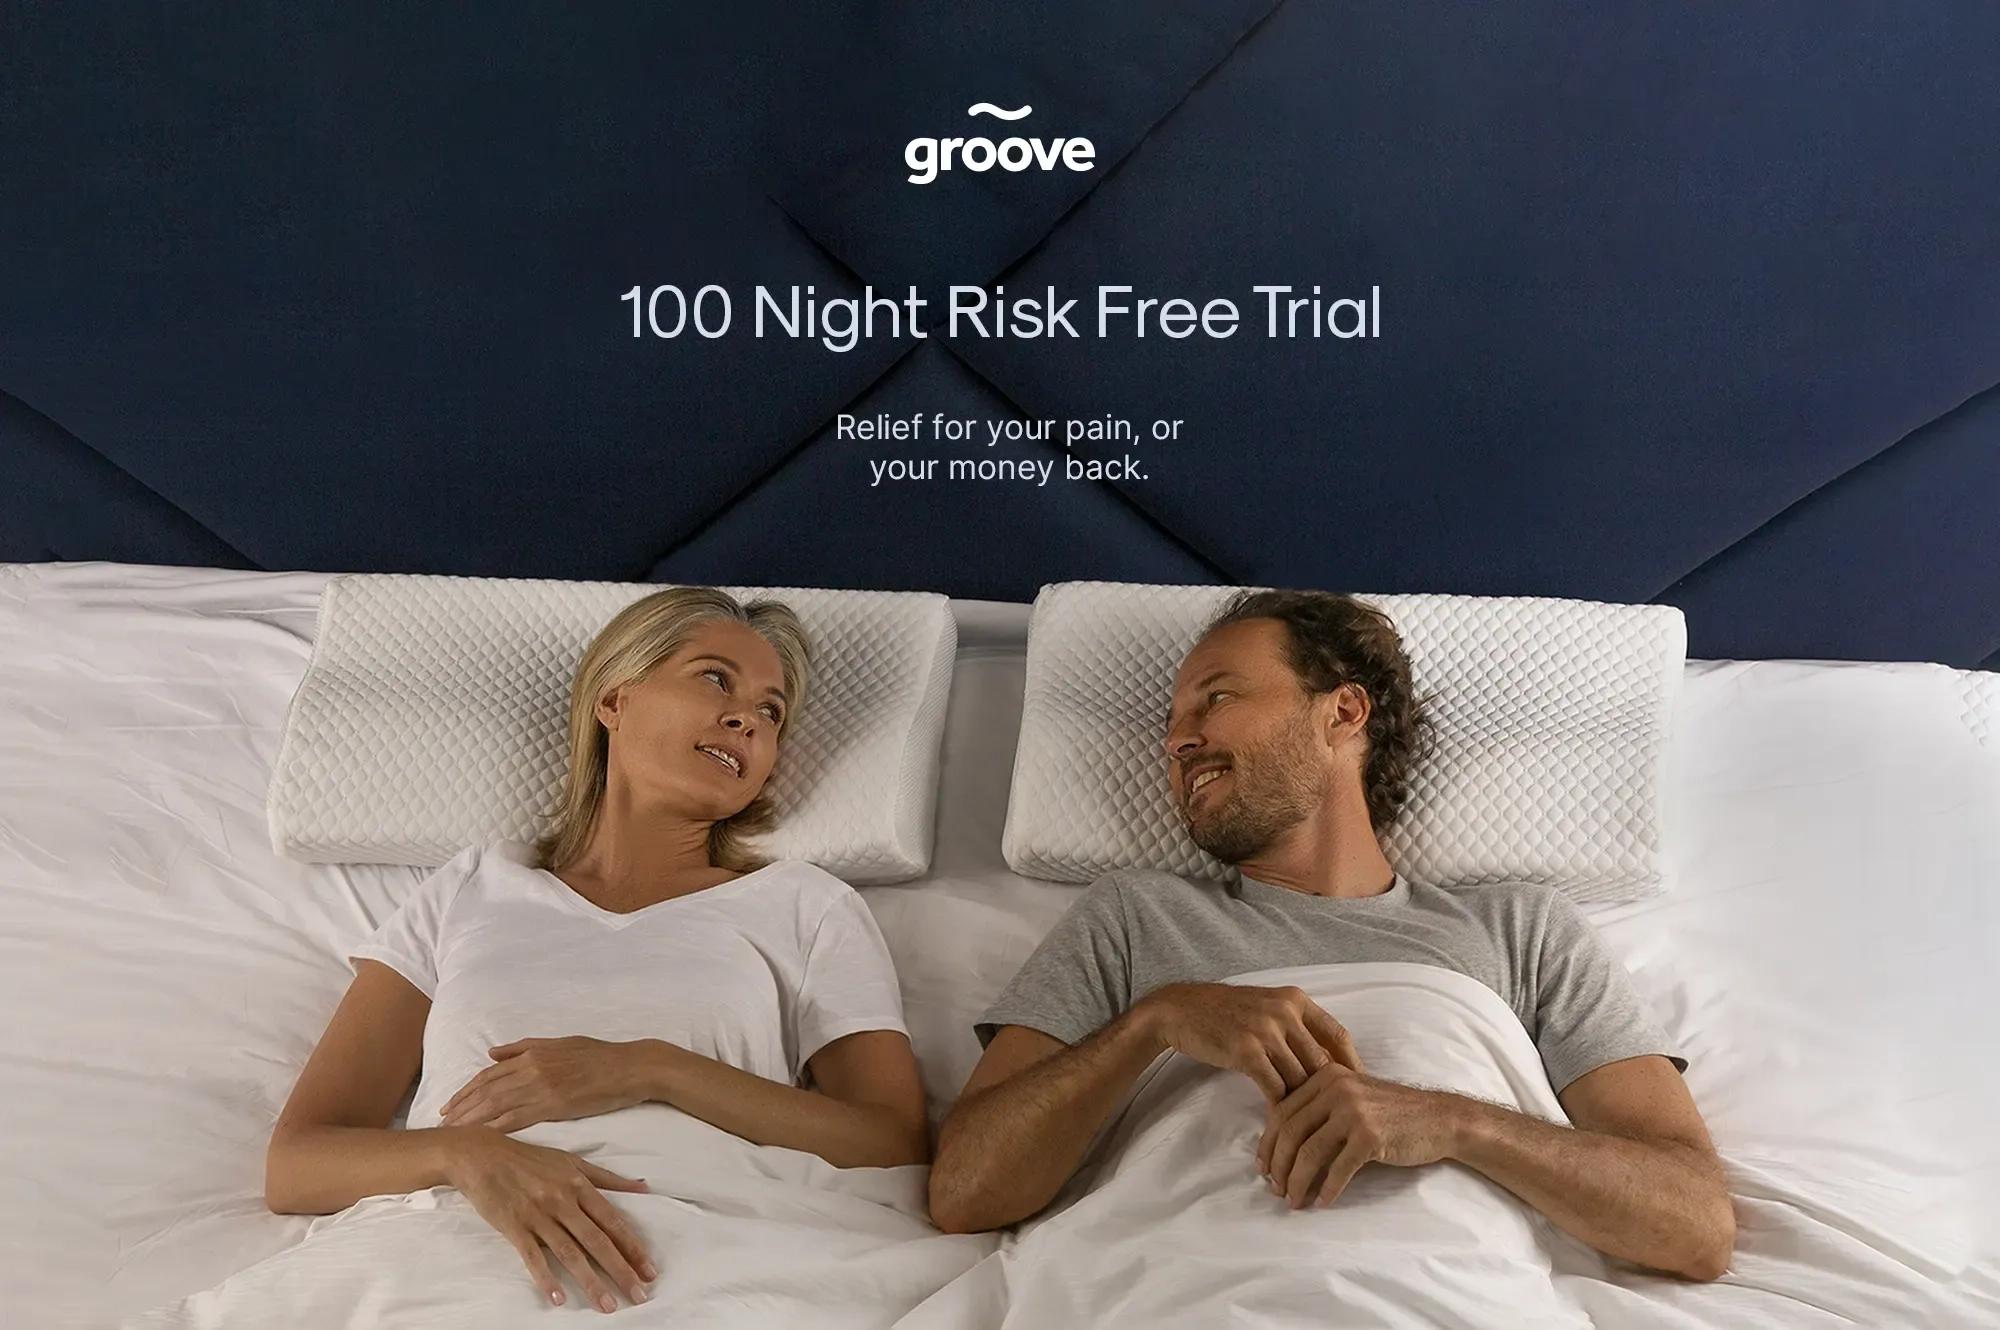 Groove pillow comes with 100 night risk free trial